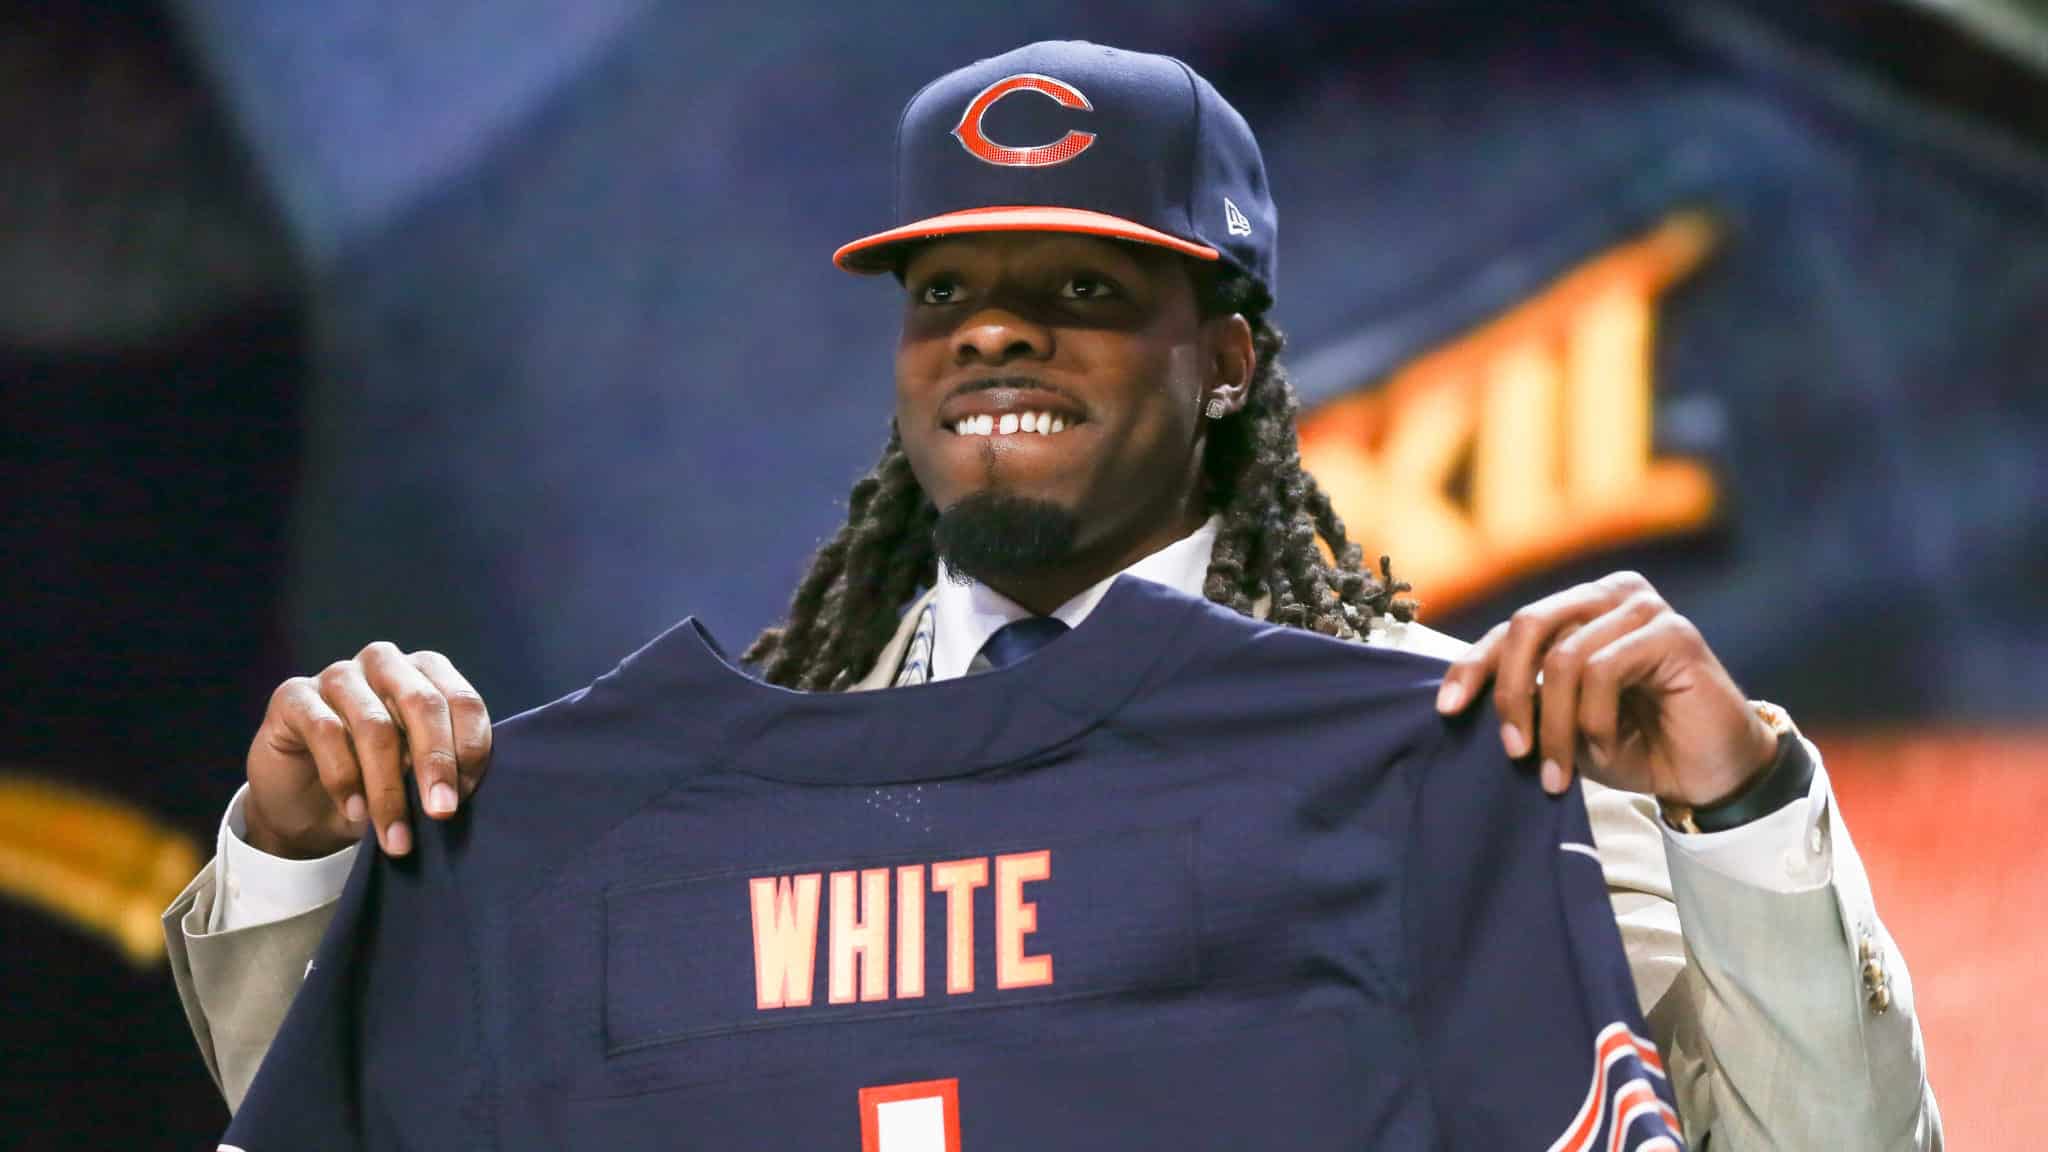 CHICAGO, IL - APRIL 30: Kevin White of the West Virginia Mountaineers holds up a jersey after being chosen #7 overall by the Chicago Bears during the first round of the 2015 NFL Draft at the Auditorium Theatre of Roosevelt University on April 30, 2015 in Chicago, Illinois.